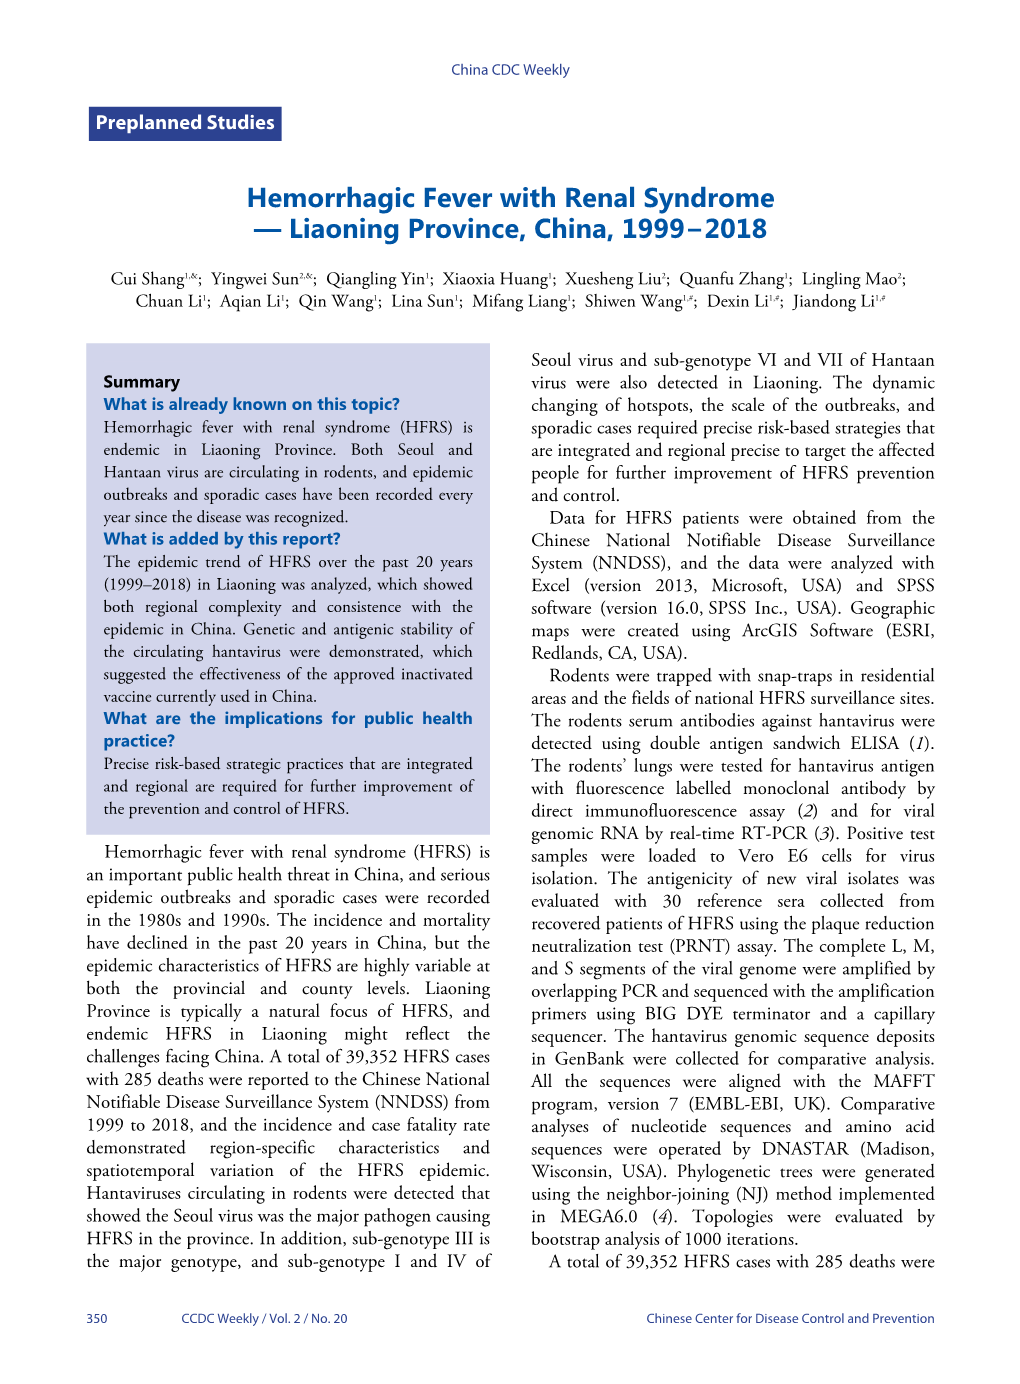 Hemorrhagic Fever with Renal Syndrome — Liaoning Province, China, 1999−2018